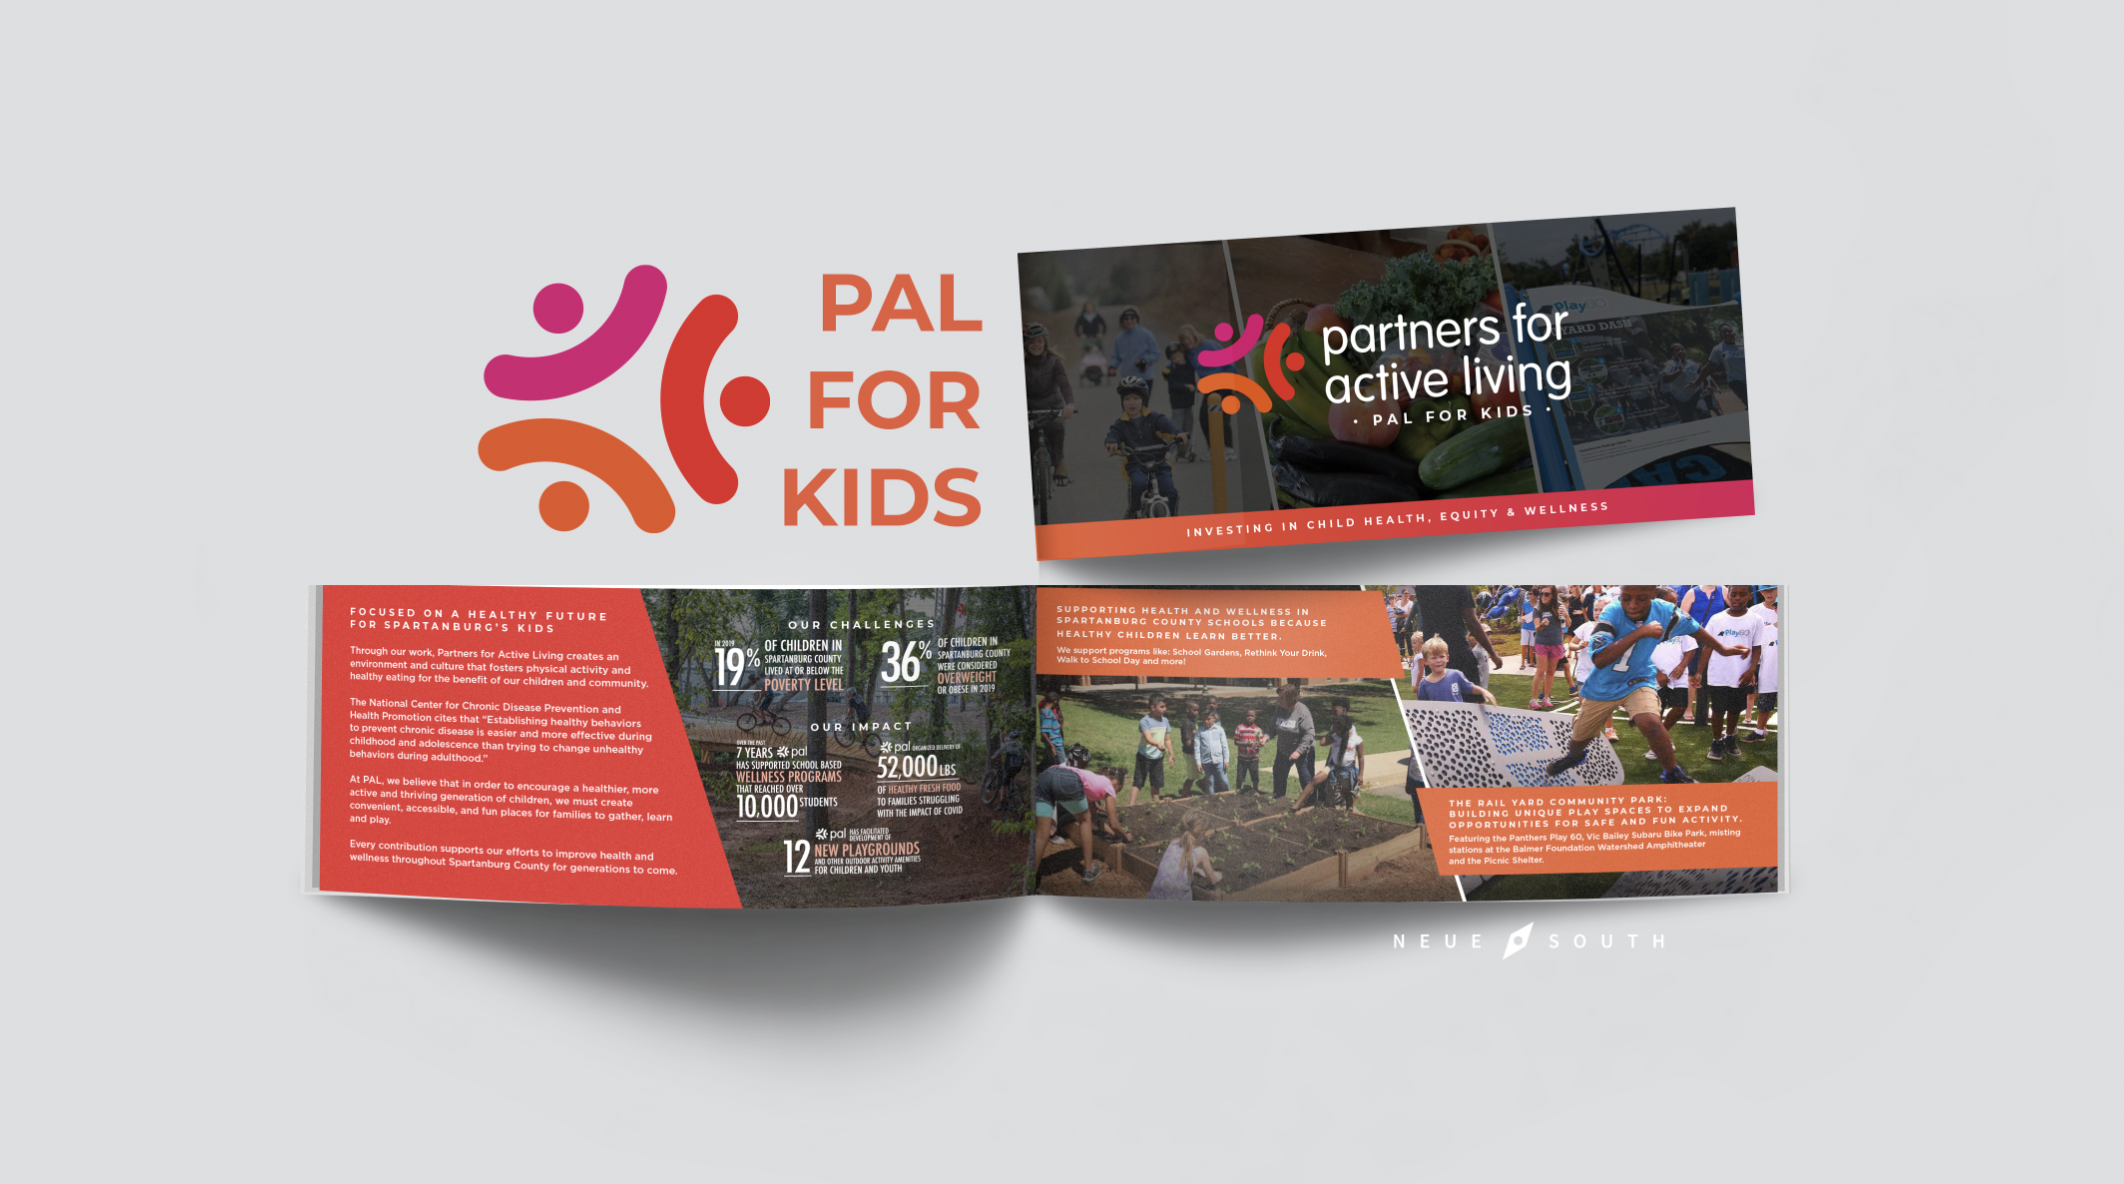 Partners for active living PAL for kids